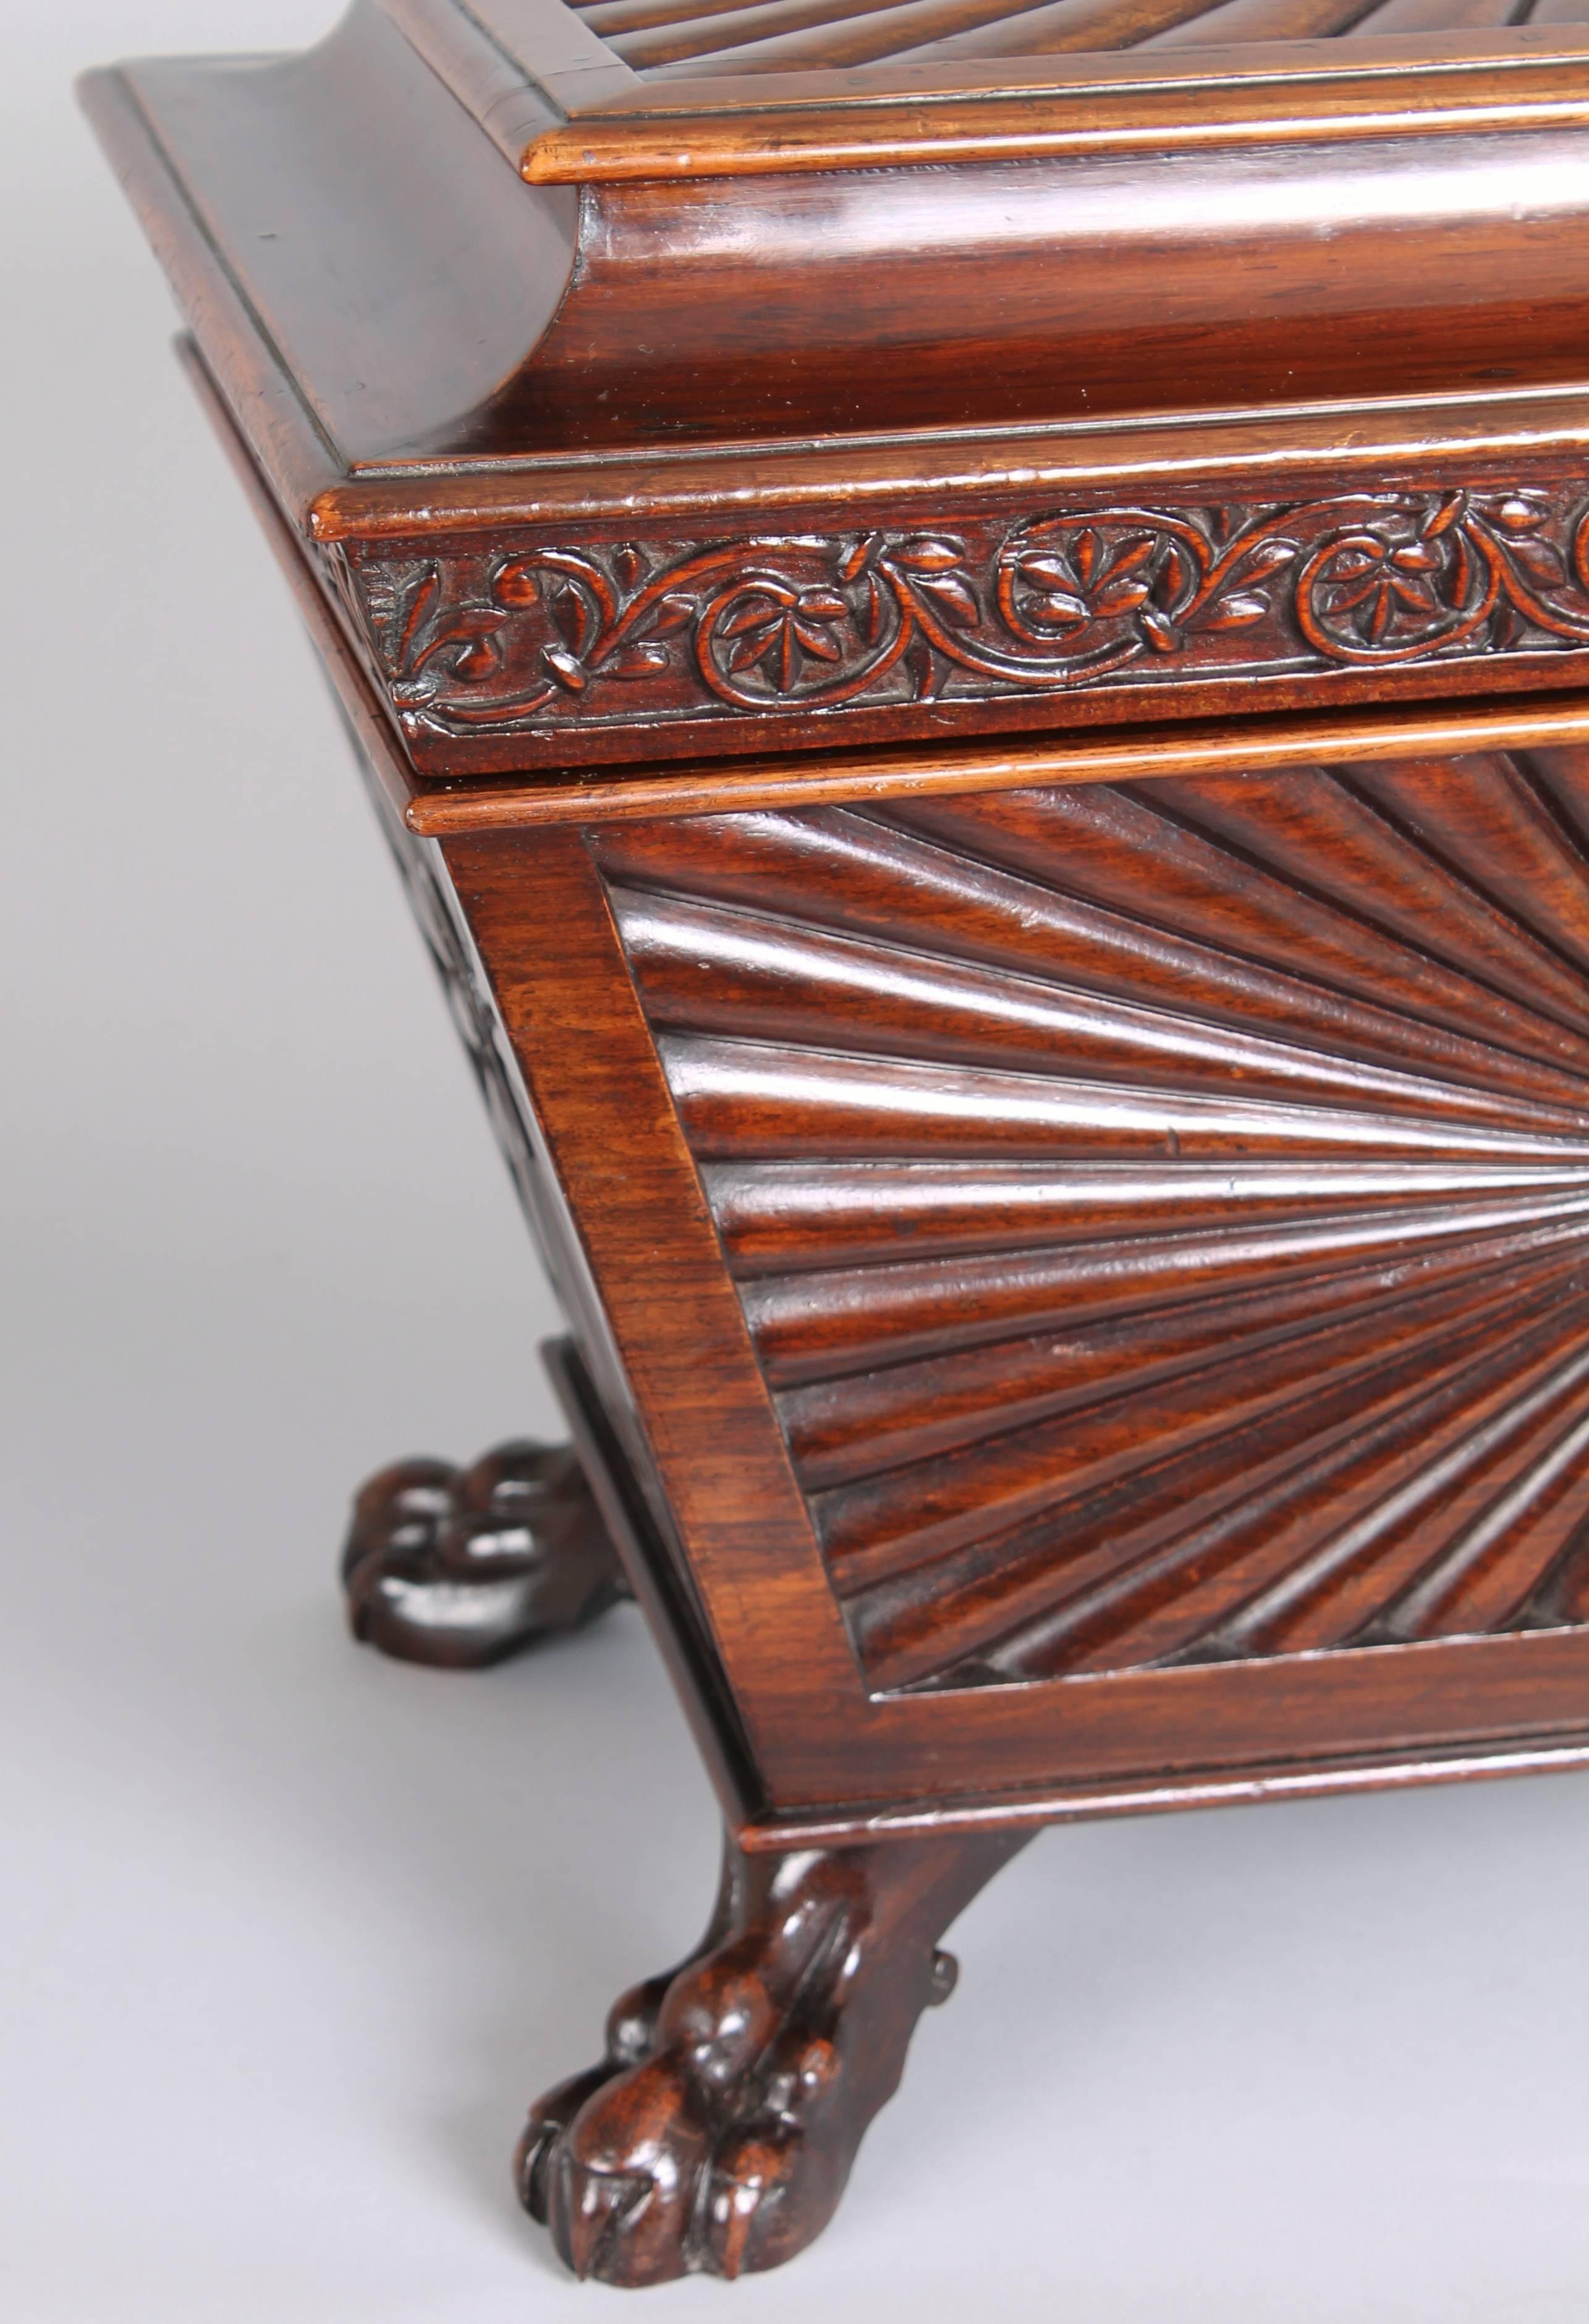 Great Britain (UK) George IV Period Rosewood Casket For Sale